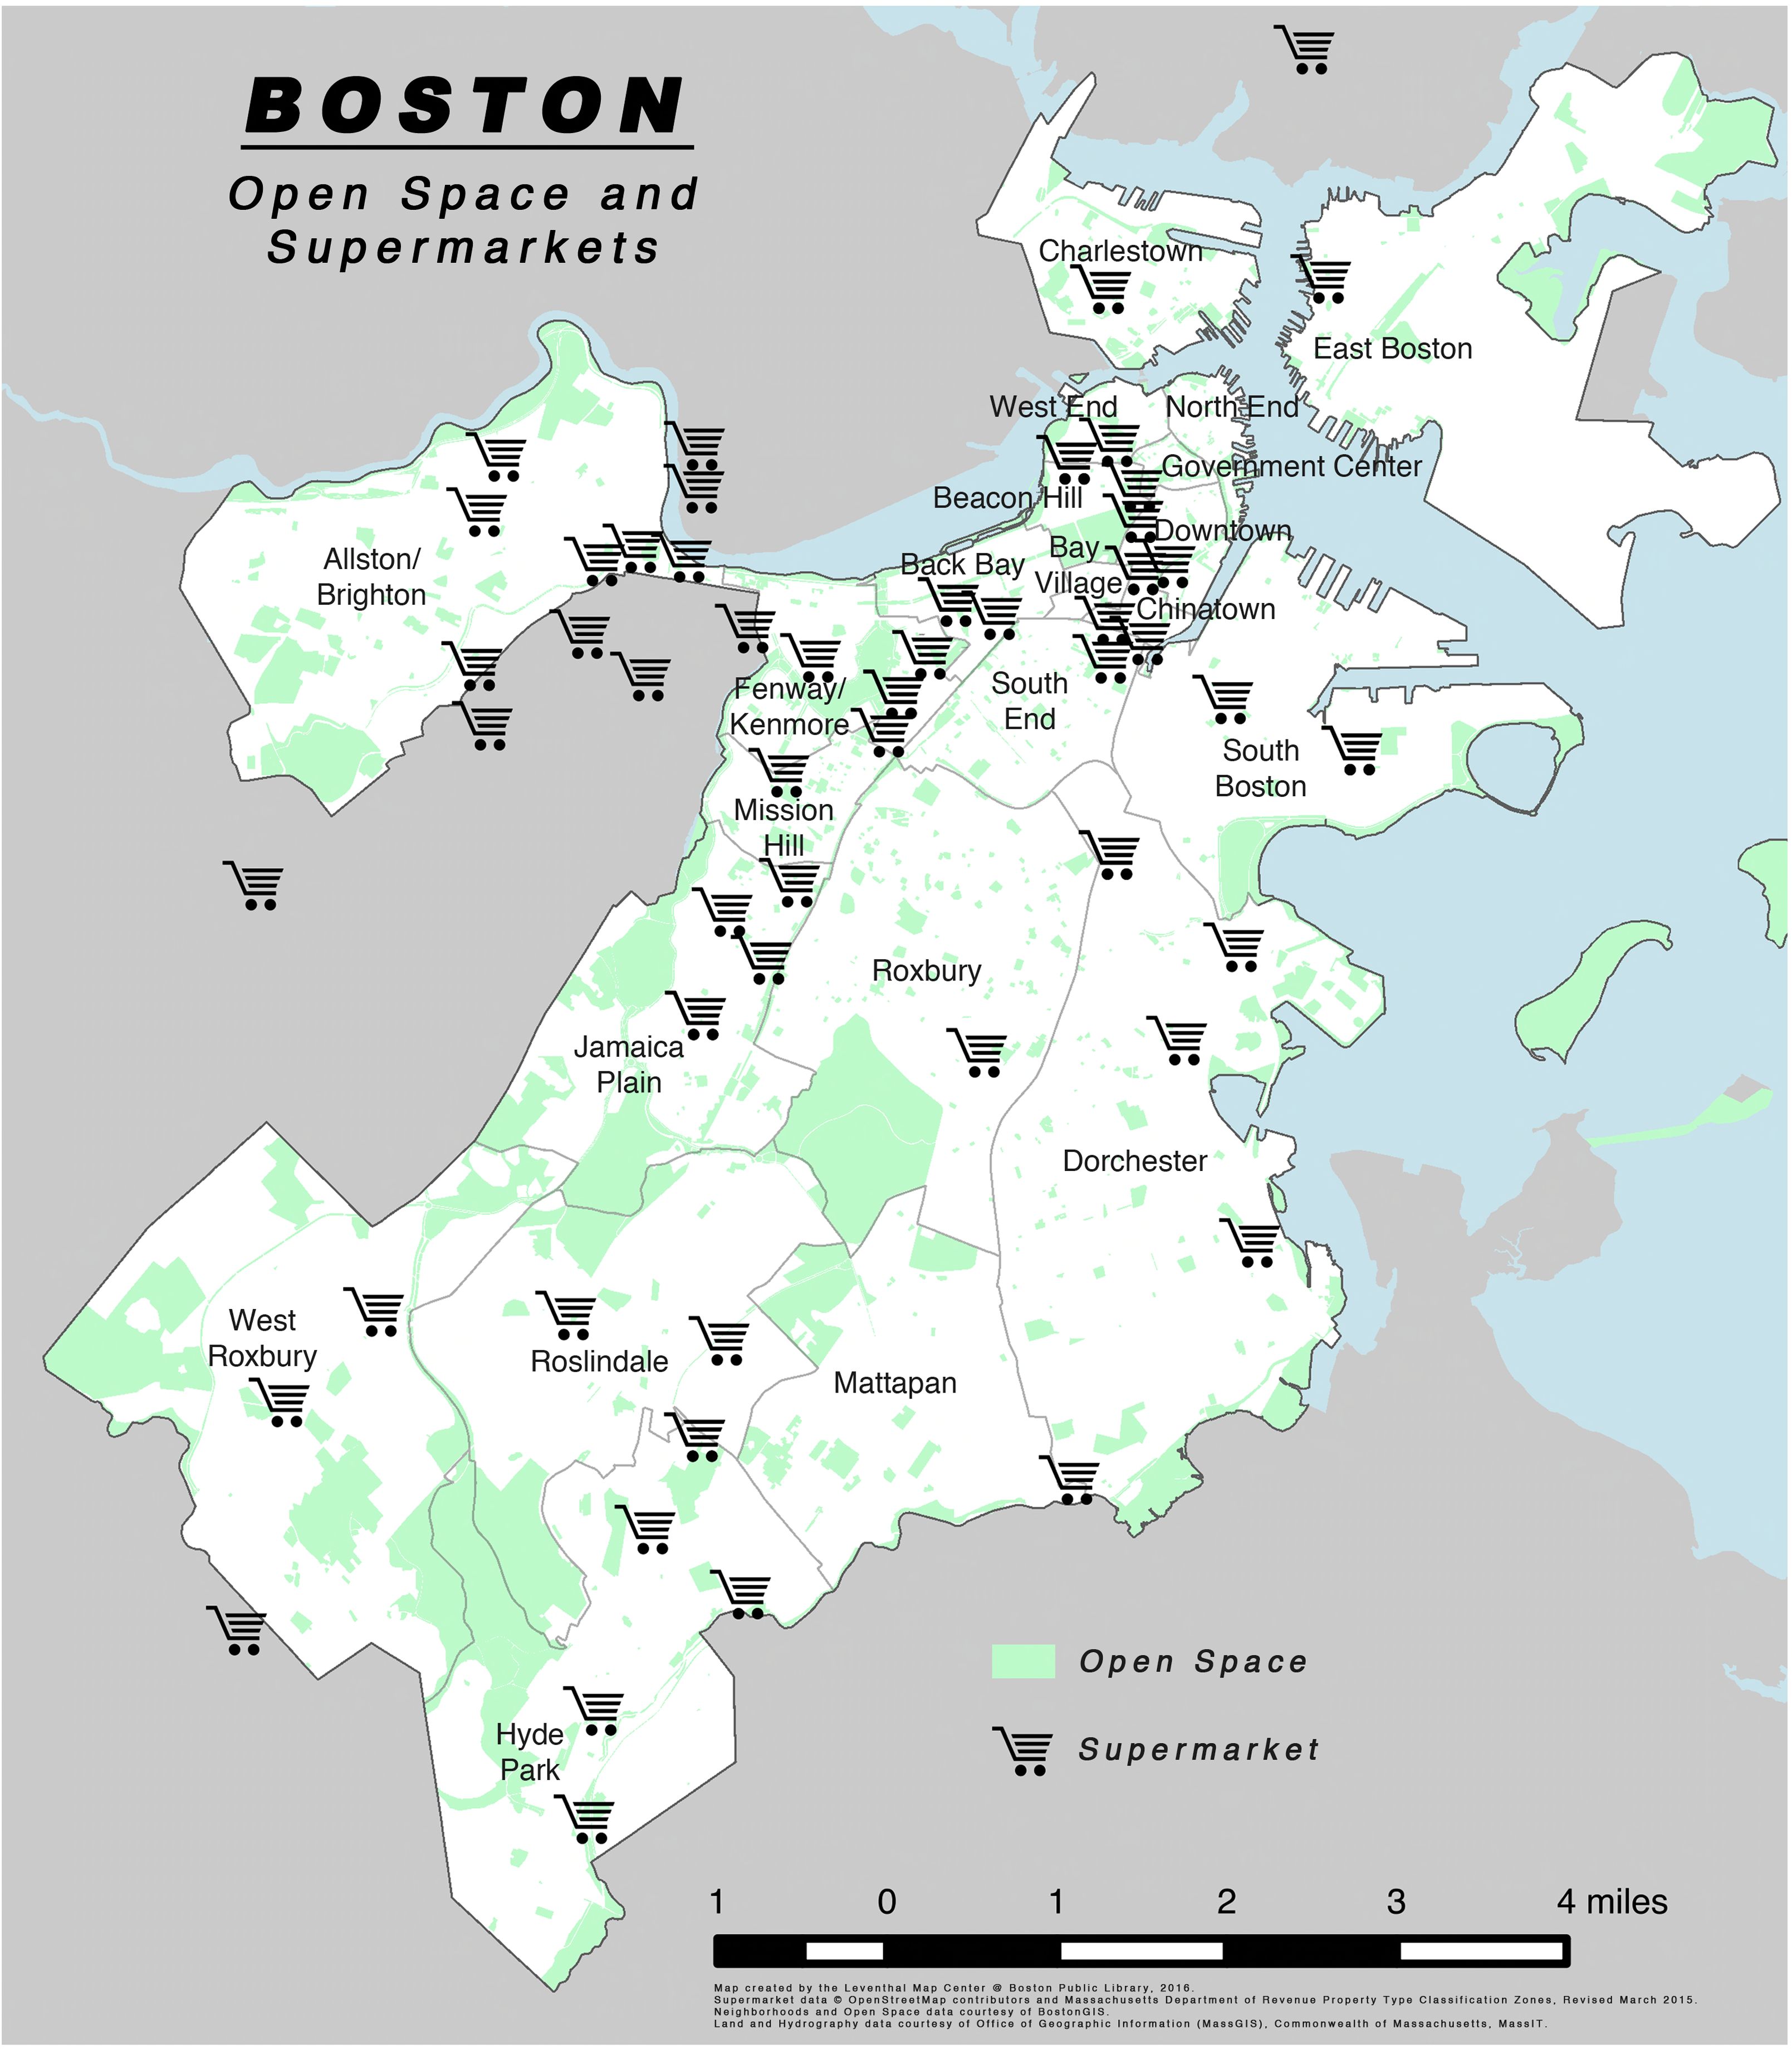 A map showing Boston's supermarket locations and open spaces in the city